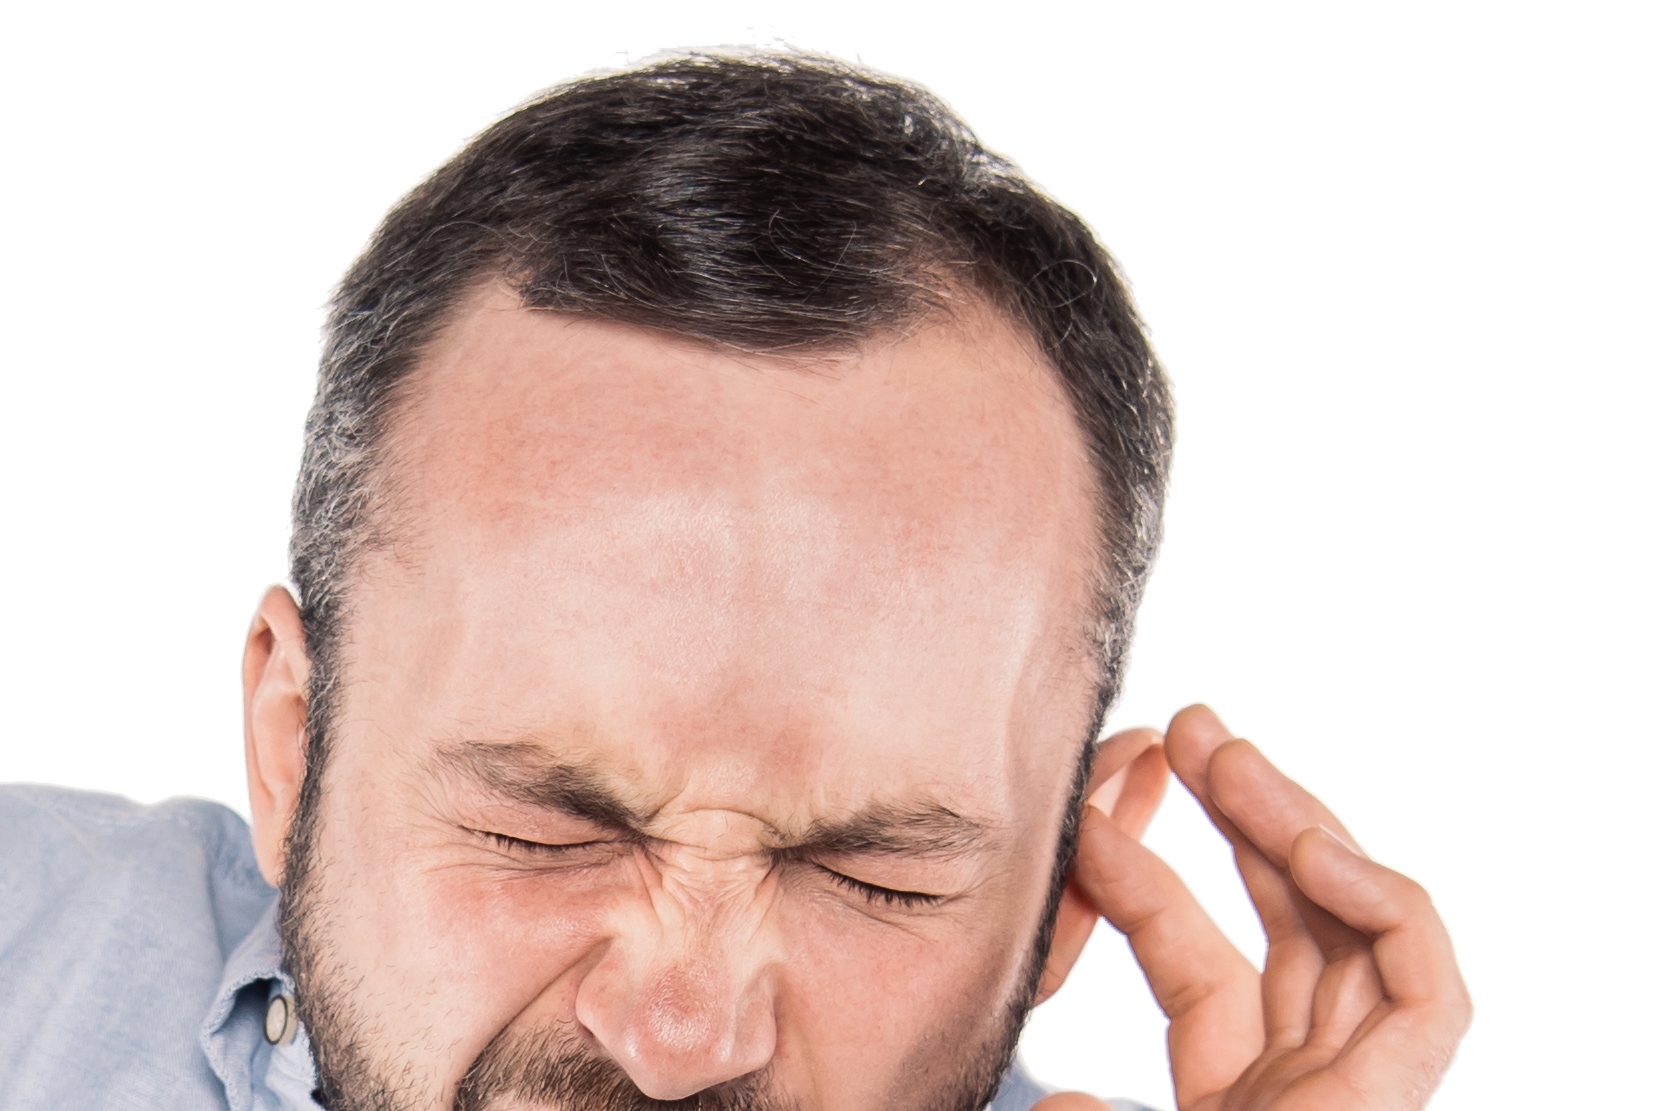 Why Can Tinnitus Be Louder in One Ear than the Other?